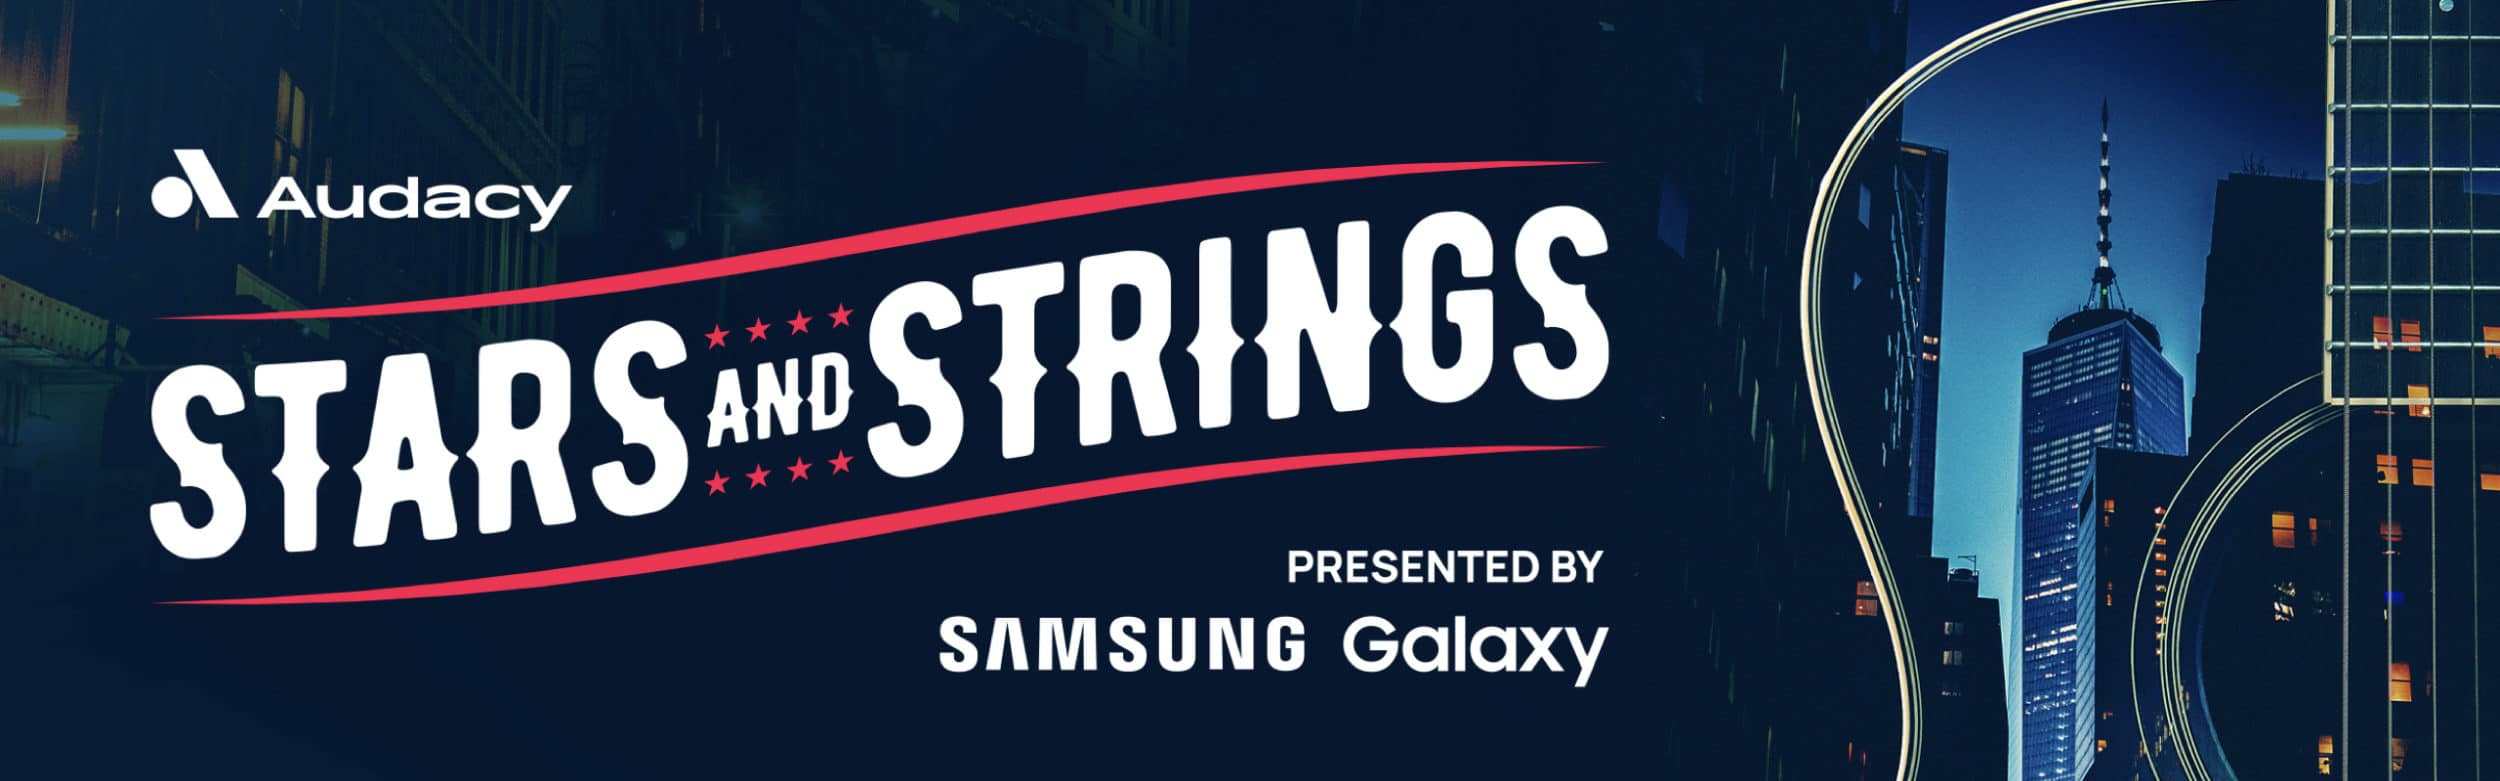 AUDACY STARS AND STRINGS presented by Samsung